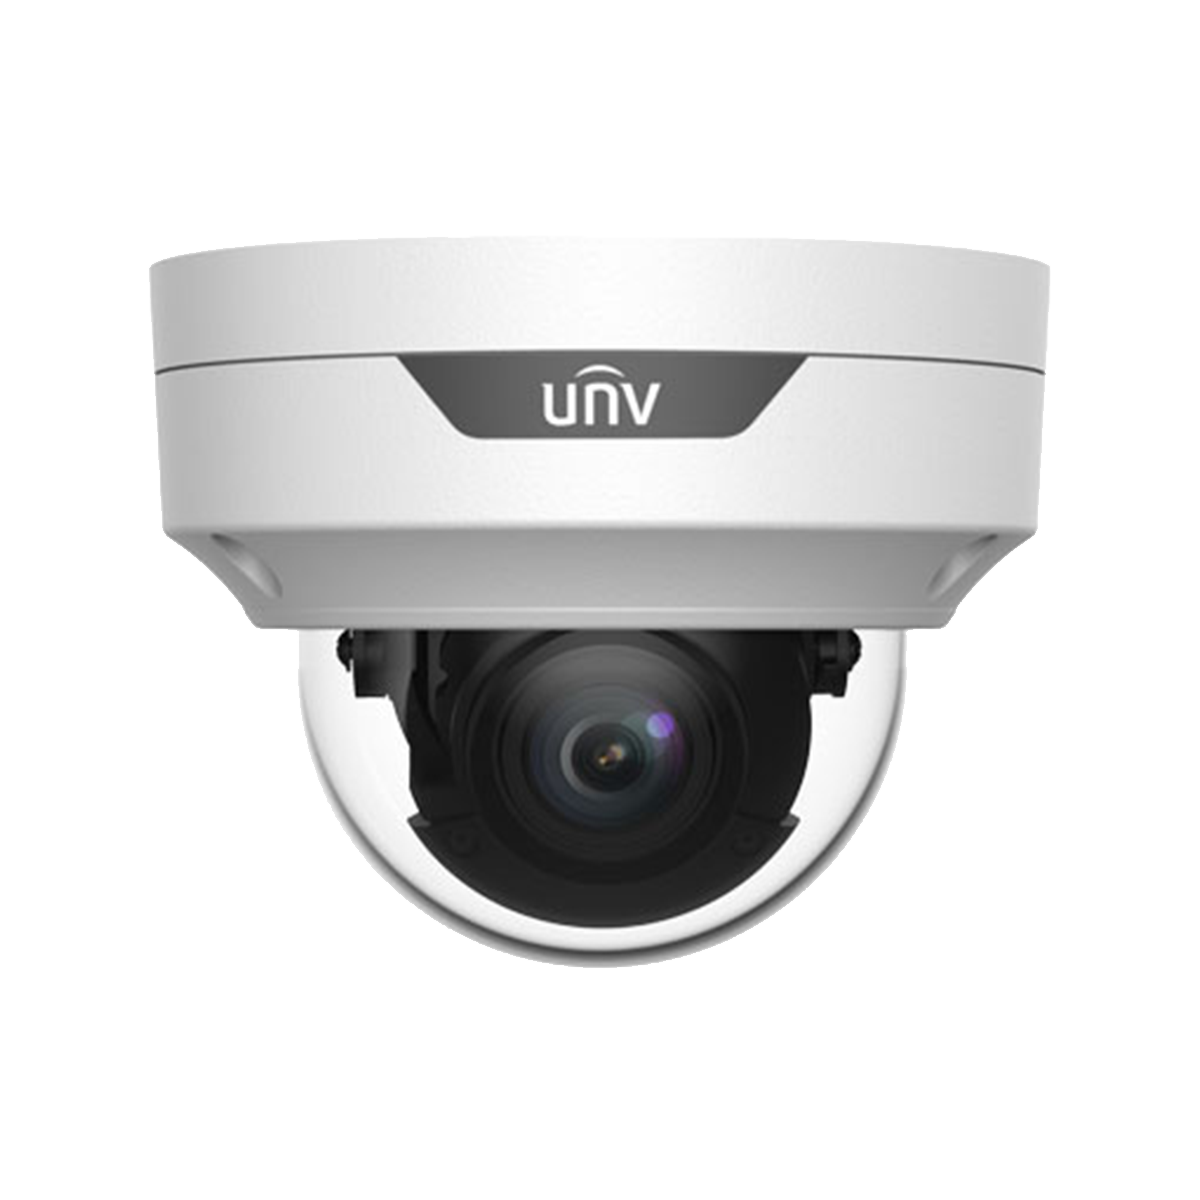 4MP Cable-free WDR IR Dome Network Camera